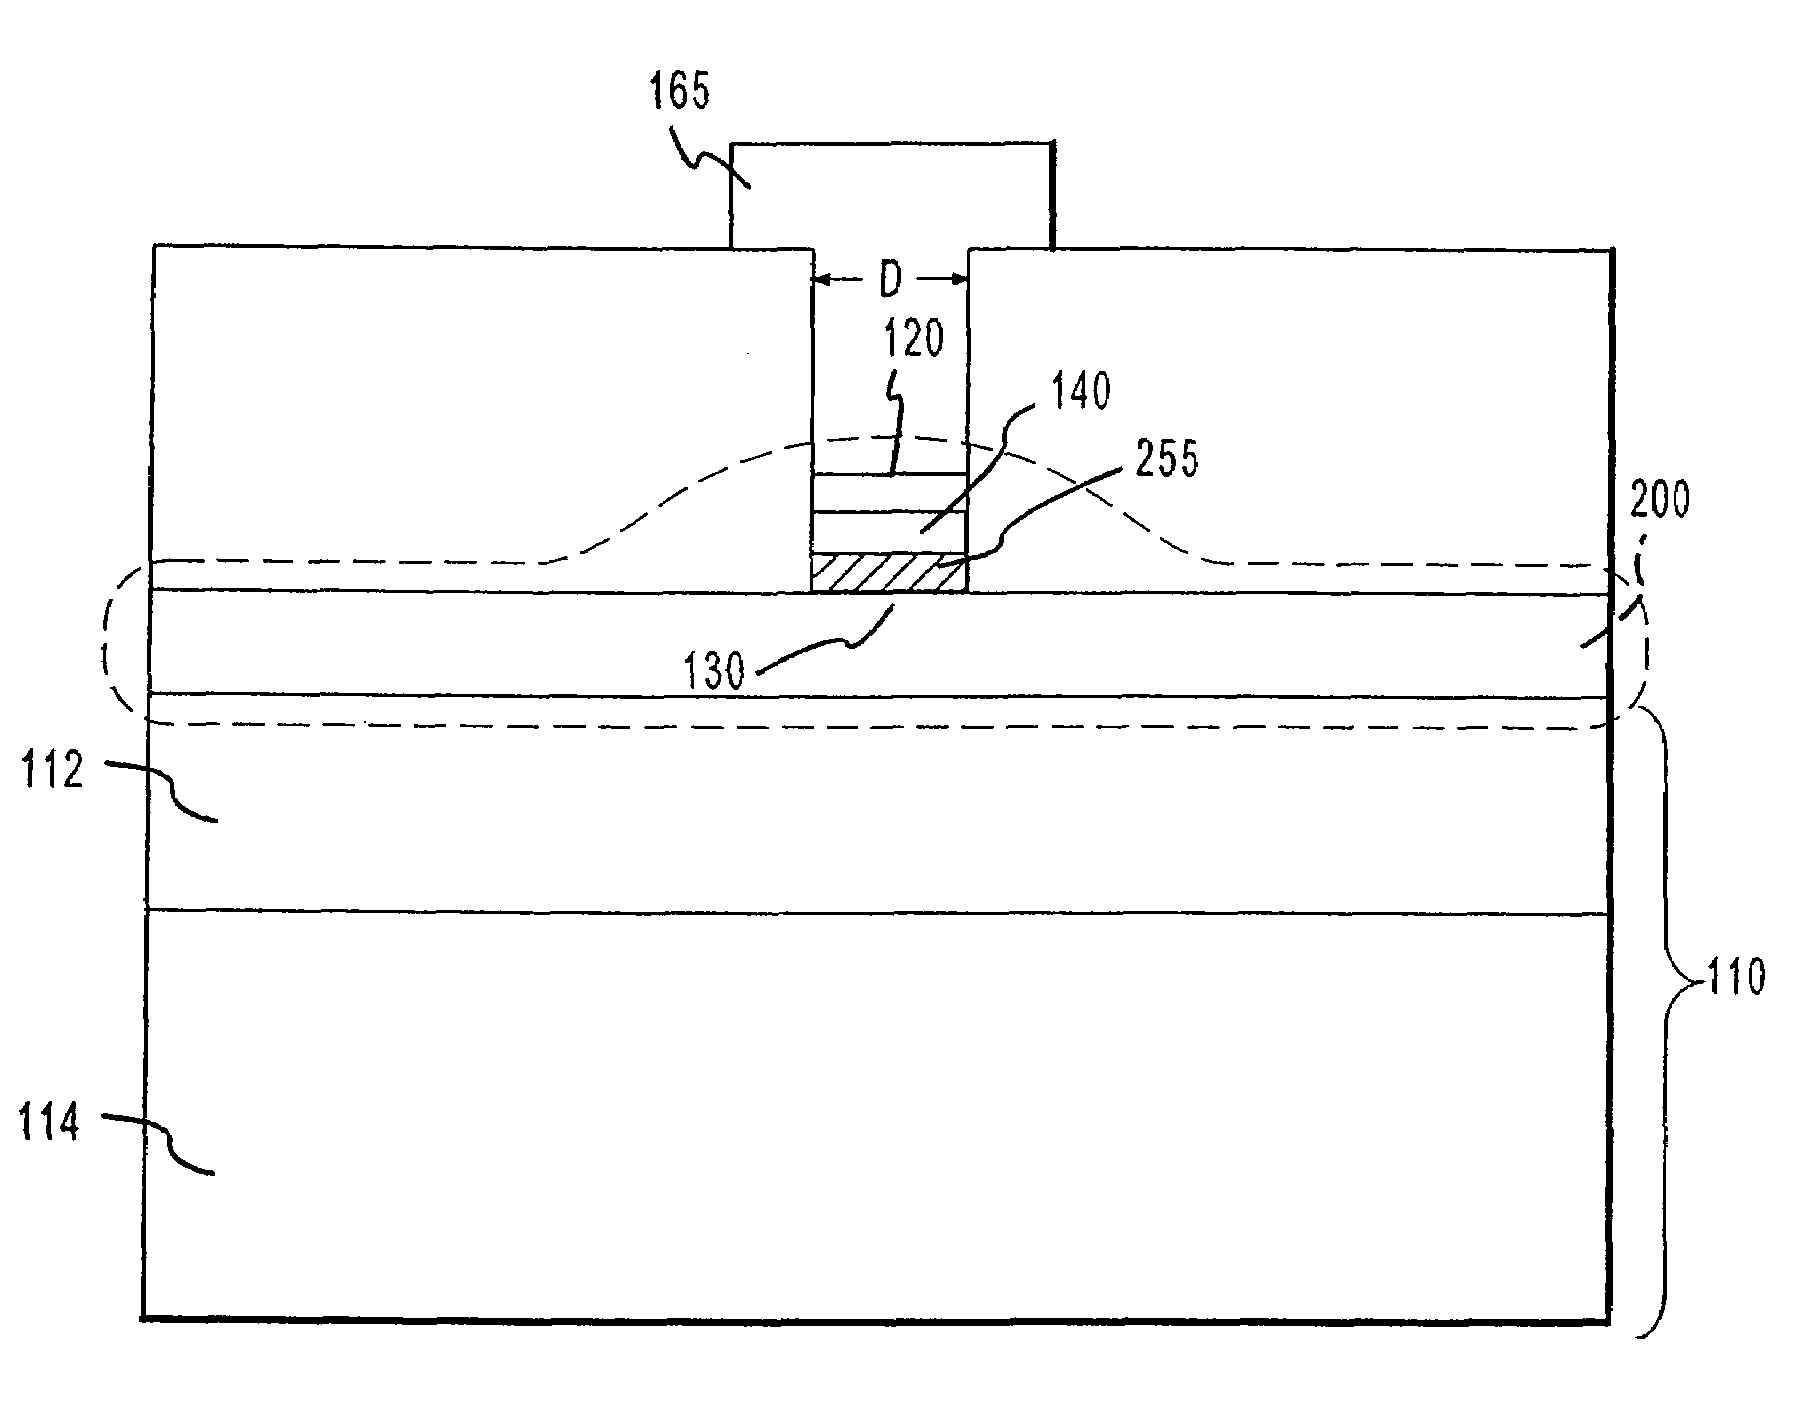 Microelectric programmable device and methods of forming and programming the same